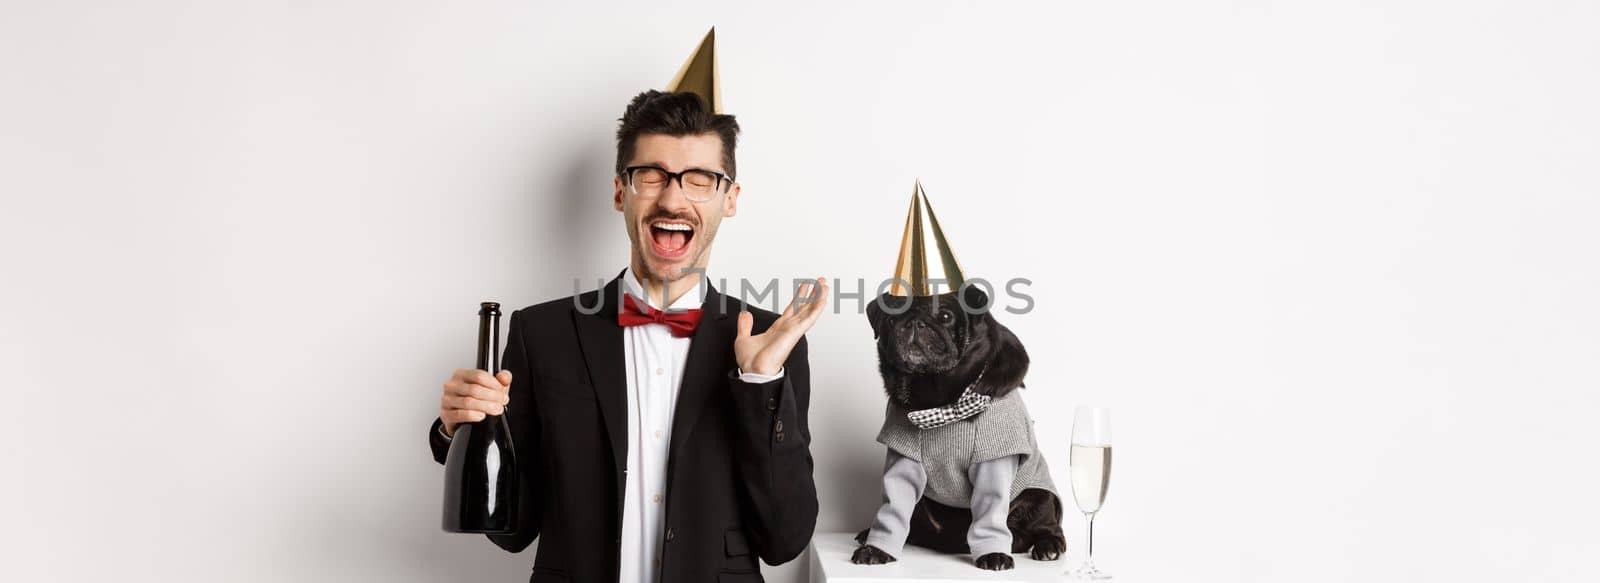 Happy young man celebrating holiday with cute dog, holding champagne and smiling, pug and owner wearing party costumes, white background.